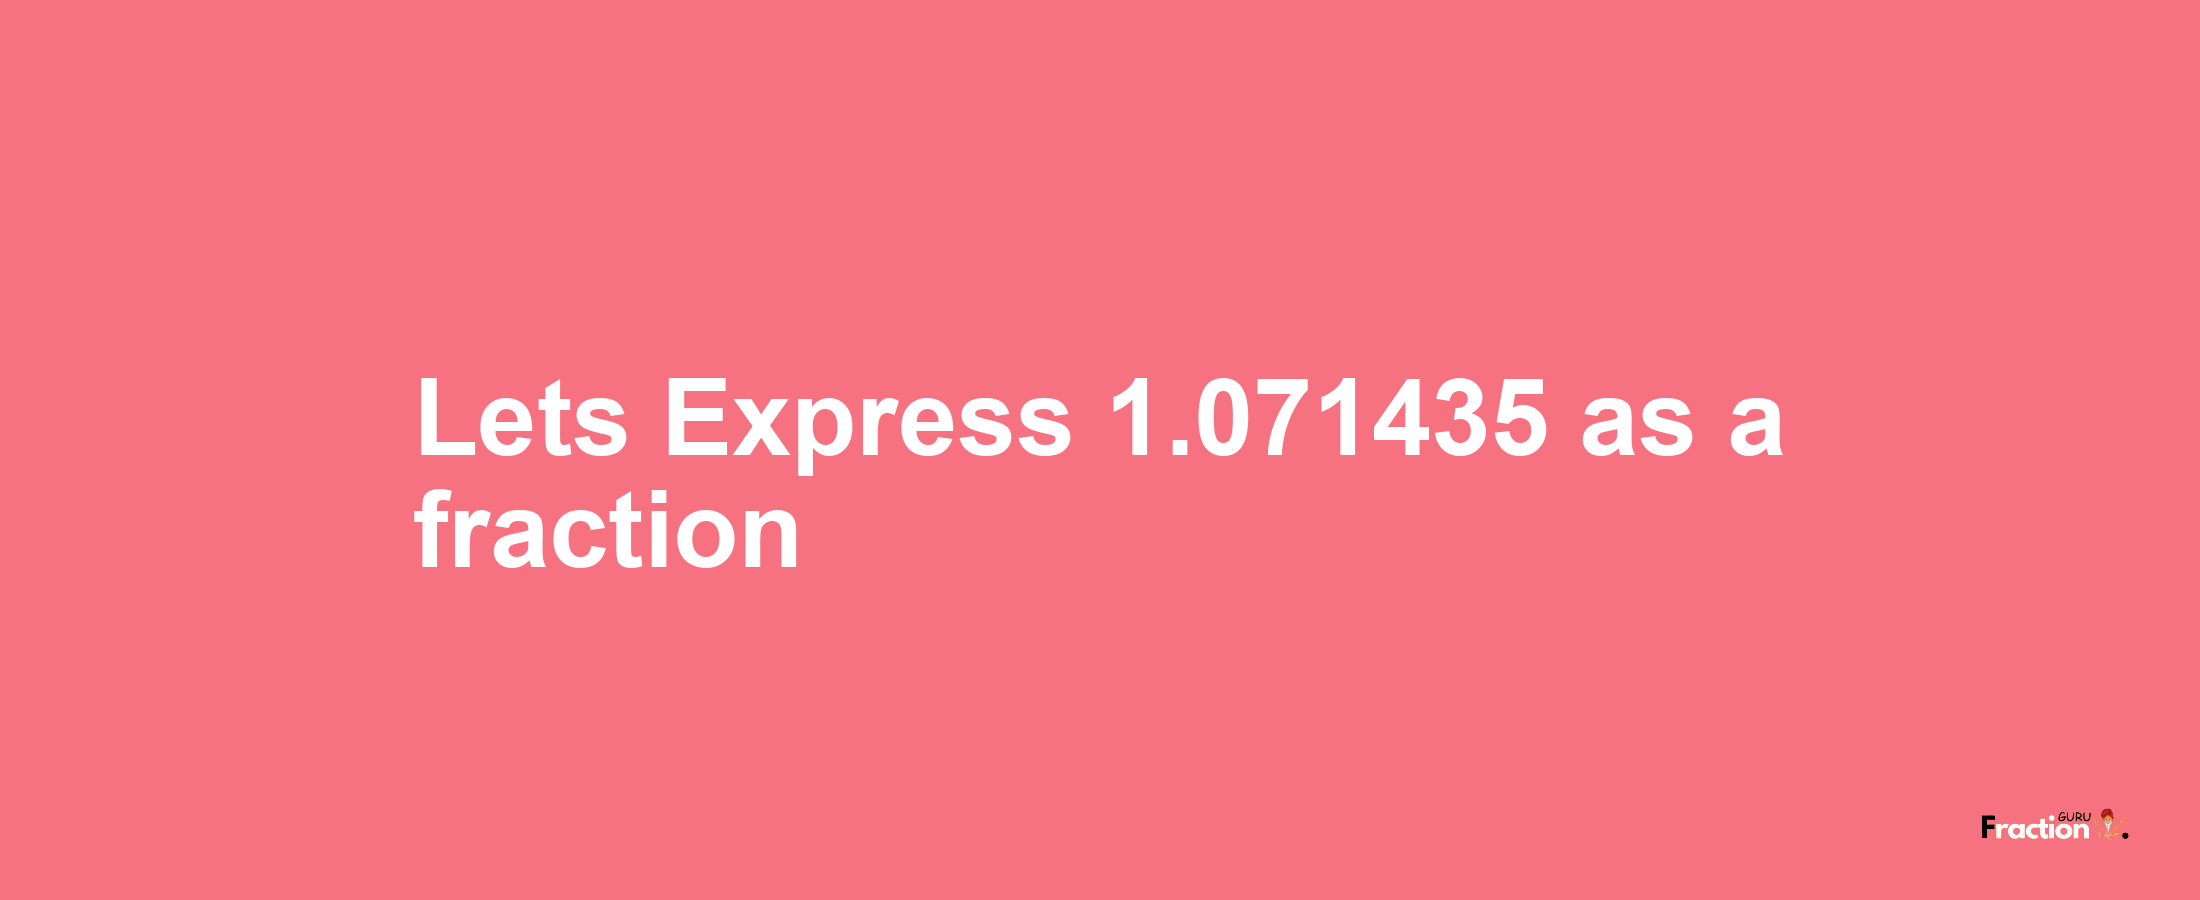 Lets Express 1.071435 as afraction